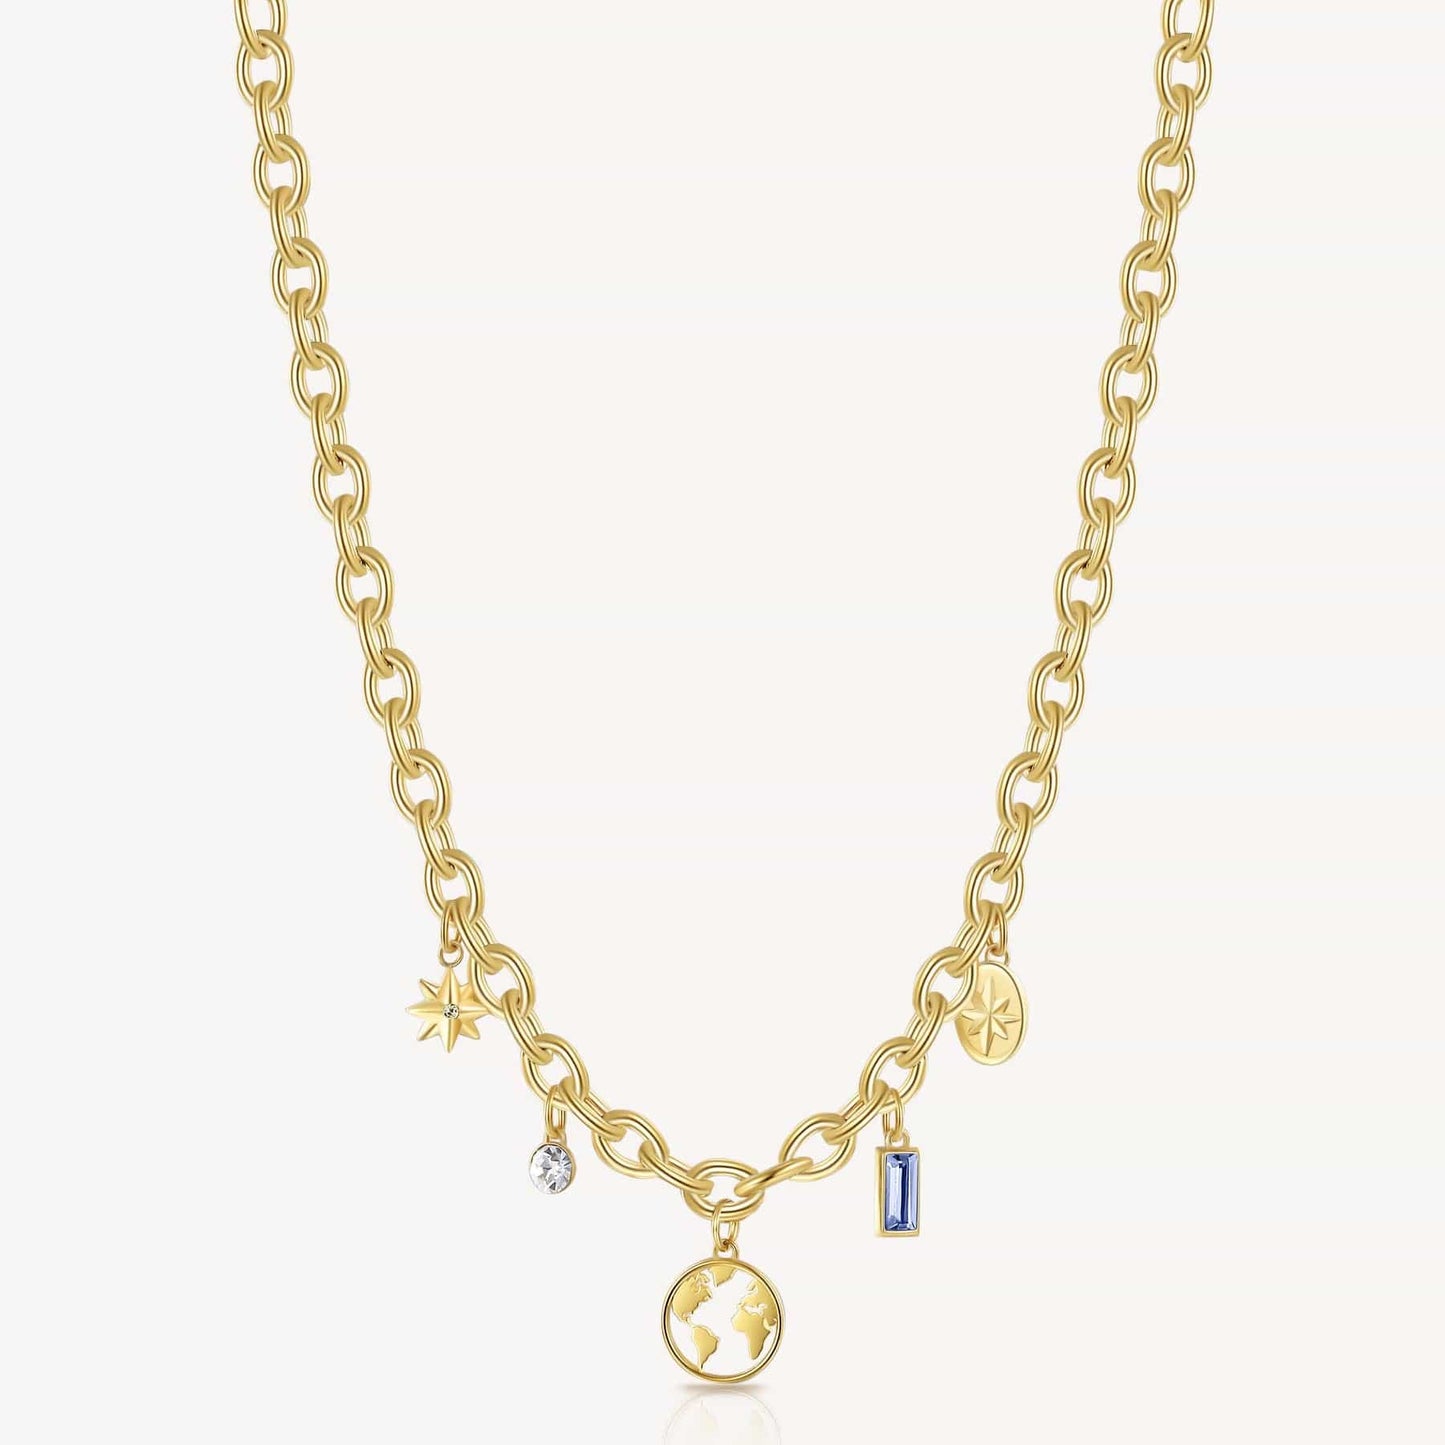 NKL-SS Stainless Steel Gold Tone Chakra Necklace - World Charms